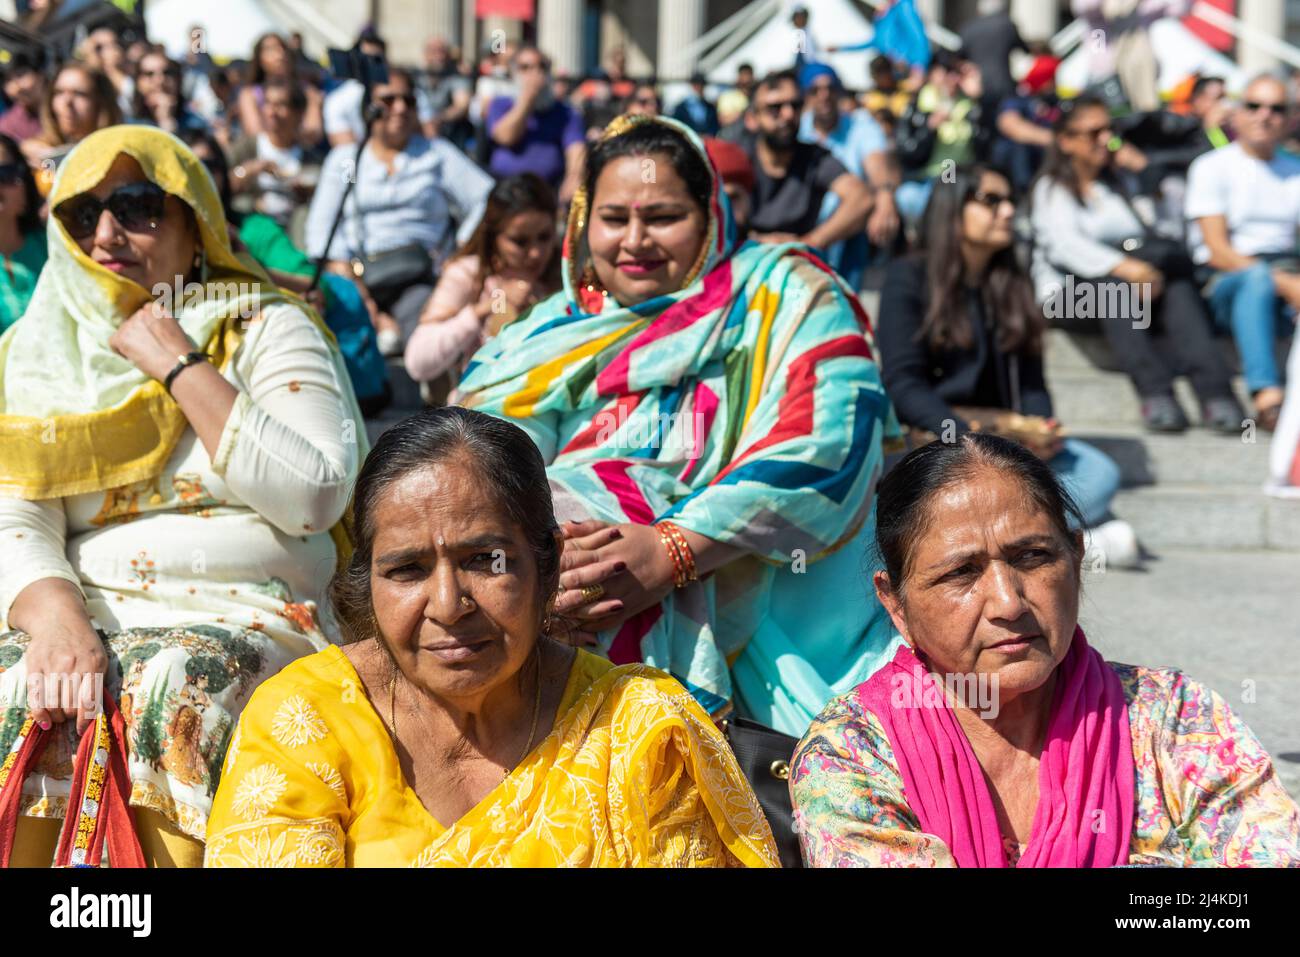 London, UK.  16 April 2022.  Women take part in the Vaisakhi festival in Trafalgar Square.  The event marks the Sikh New Year and is a celebration of Sikh and Punjabi culture.  Credit: Stephen Chung / Alamy Live News Stock Photo